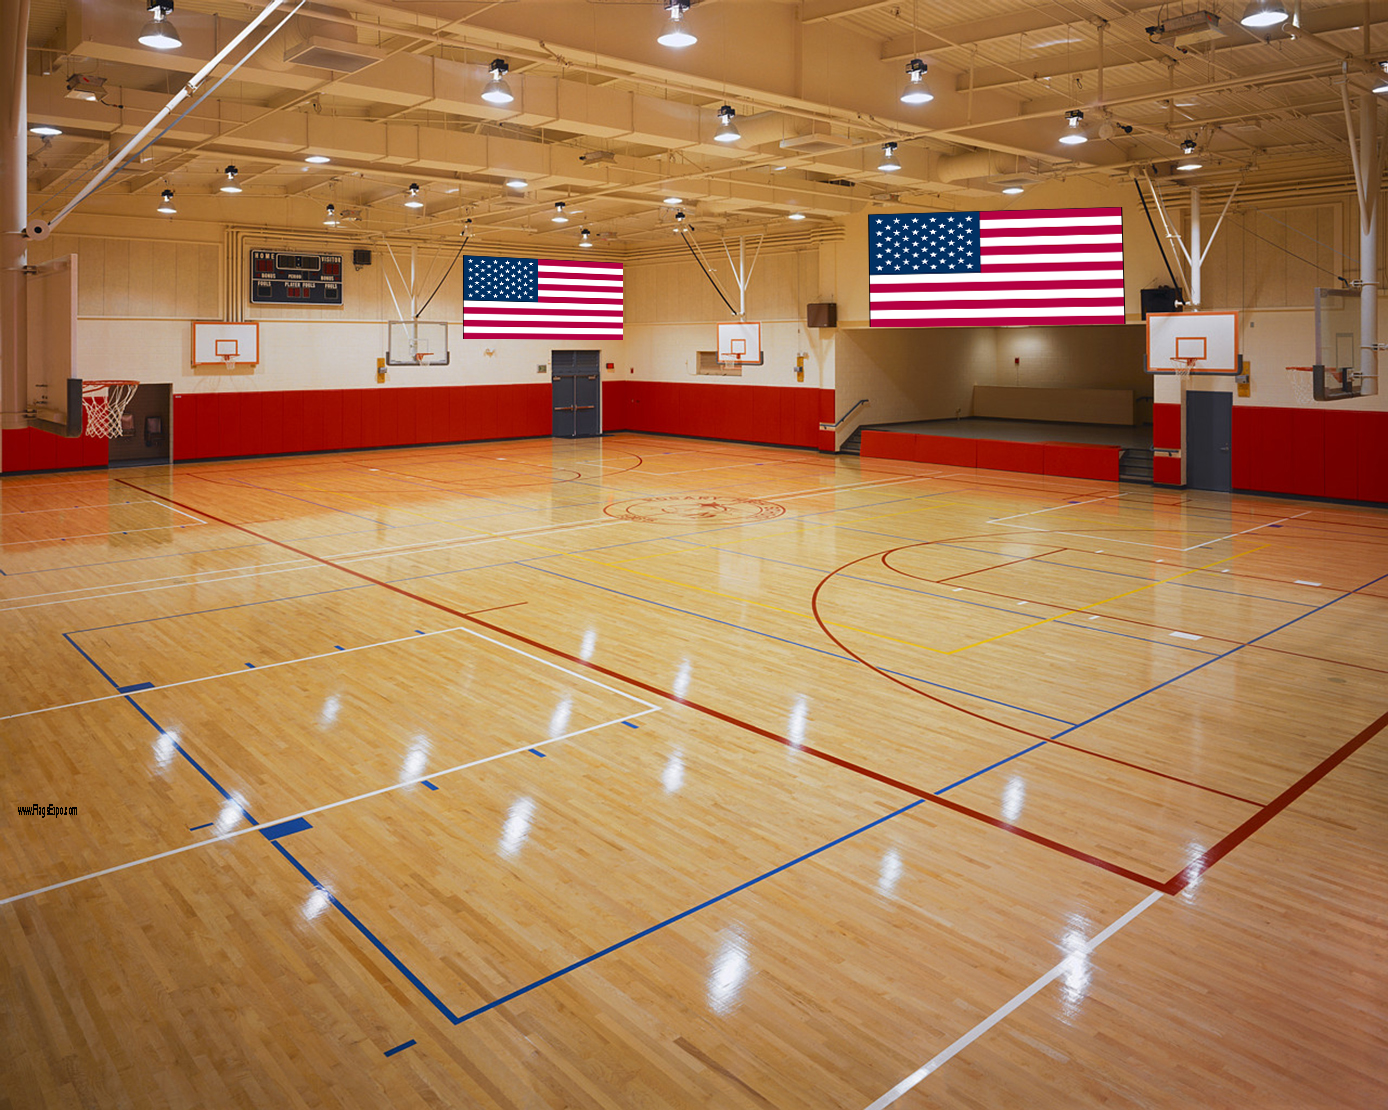 Gym and Auditorium Flags